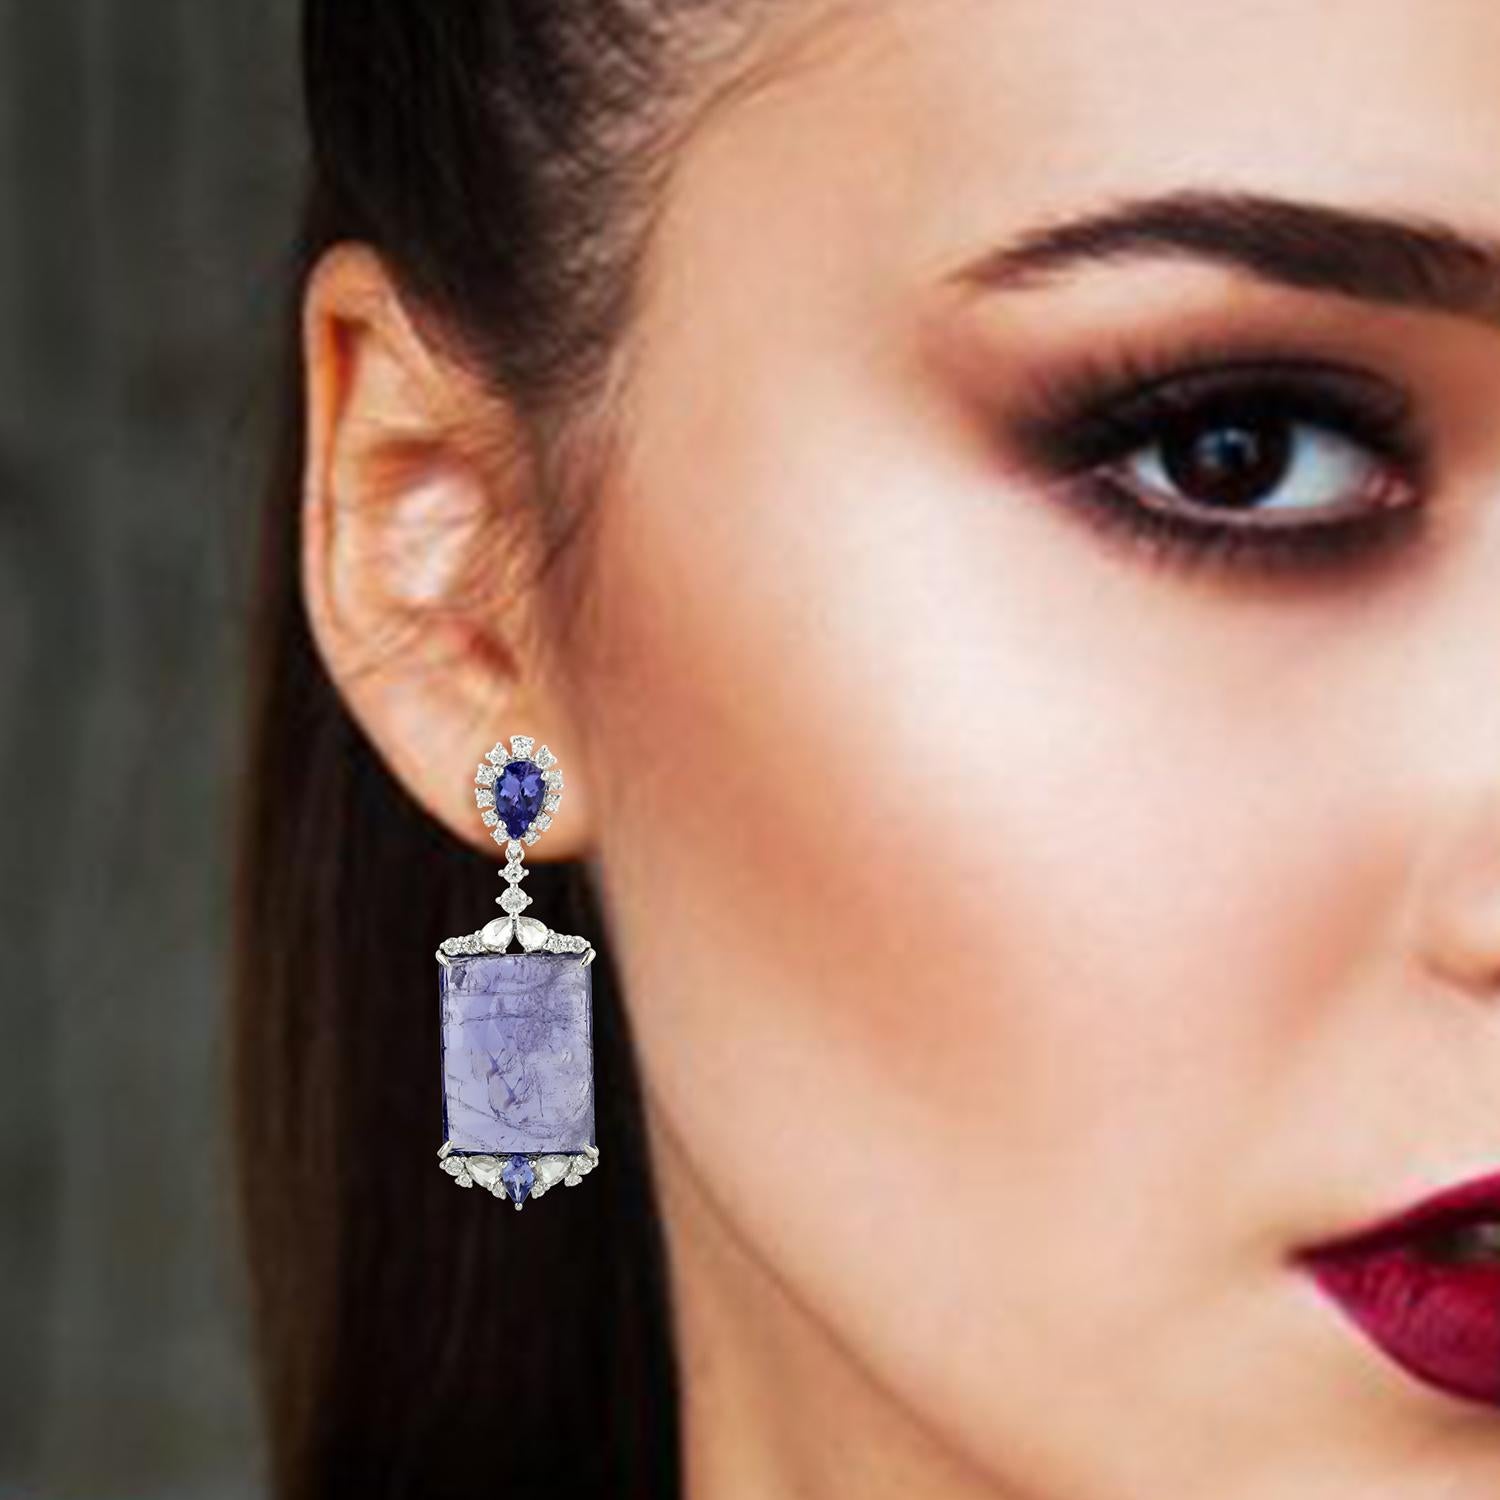 These beautiful drop earring are handcrafted in 18-karat gold. It is set with 36.63 carats tanzanite and 2.0 carats of sparkling diamonds.

FOLLOW  MEGHNA JEWELS storefront to view the latest collection & exclusive pieces.  Meghna Jewels is proudly